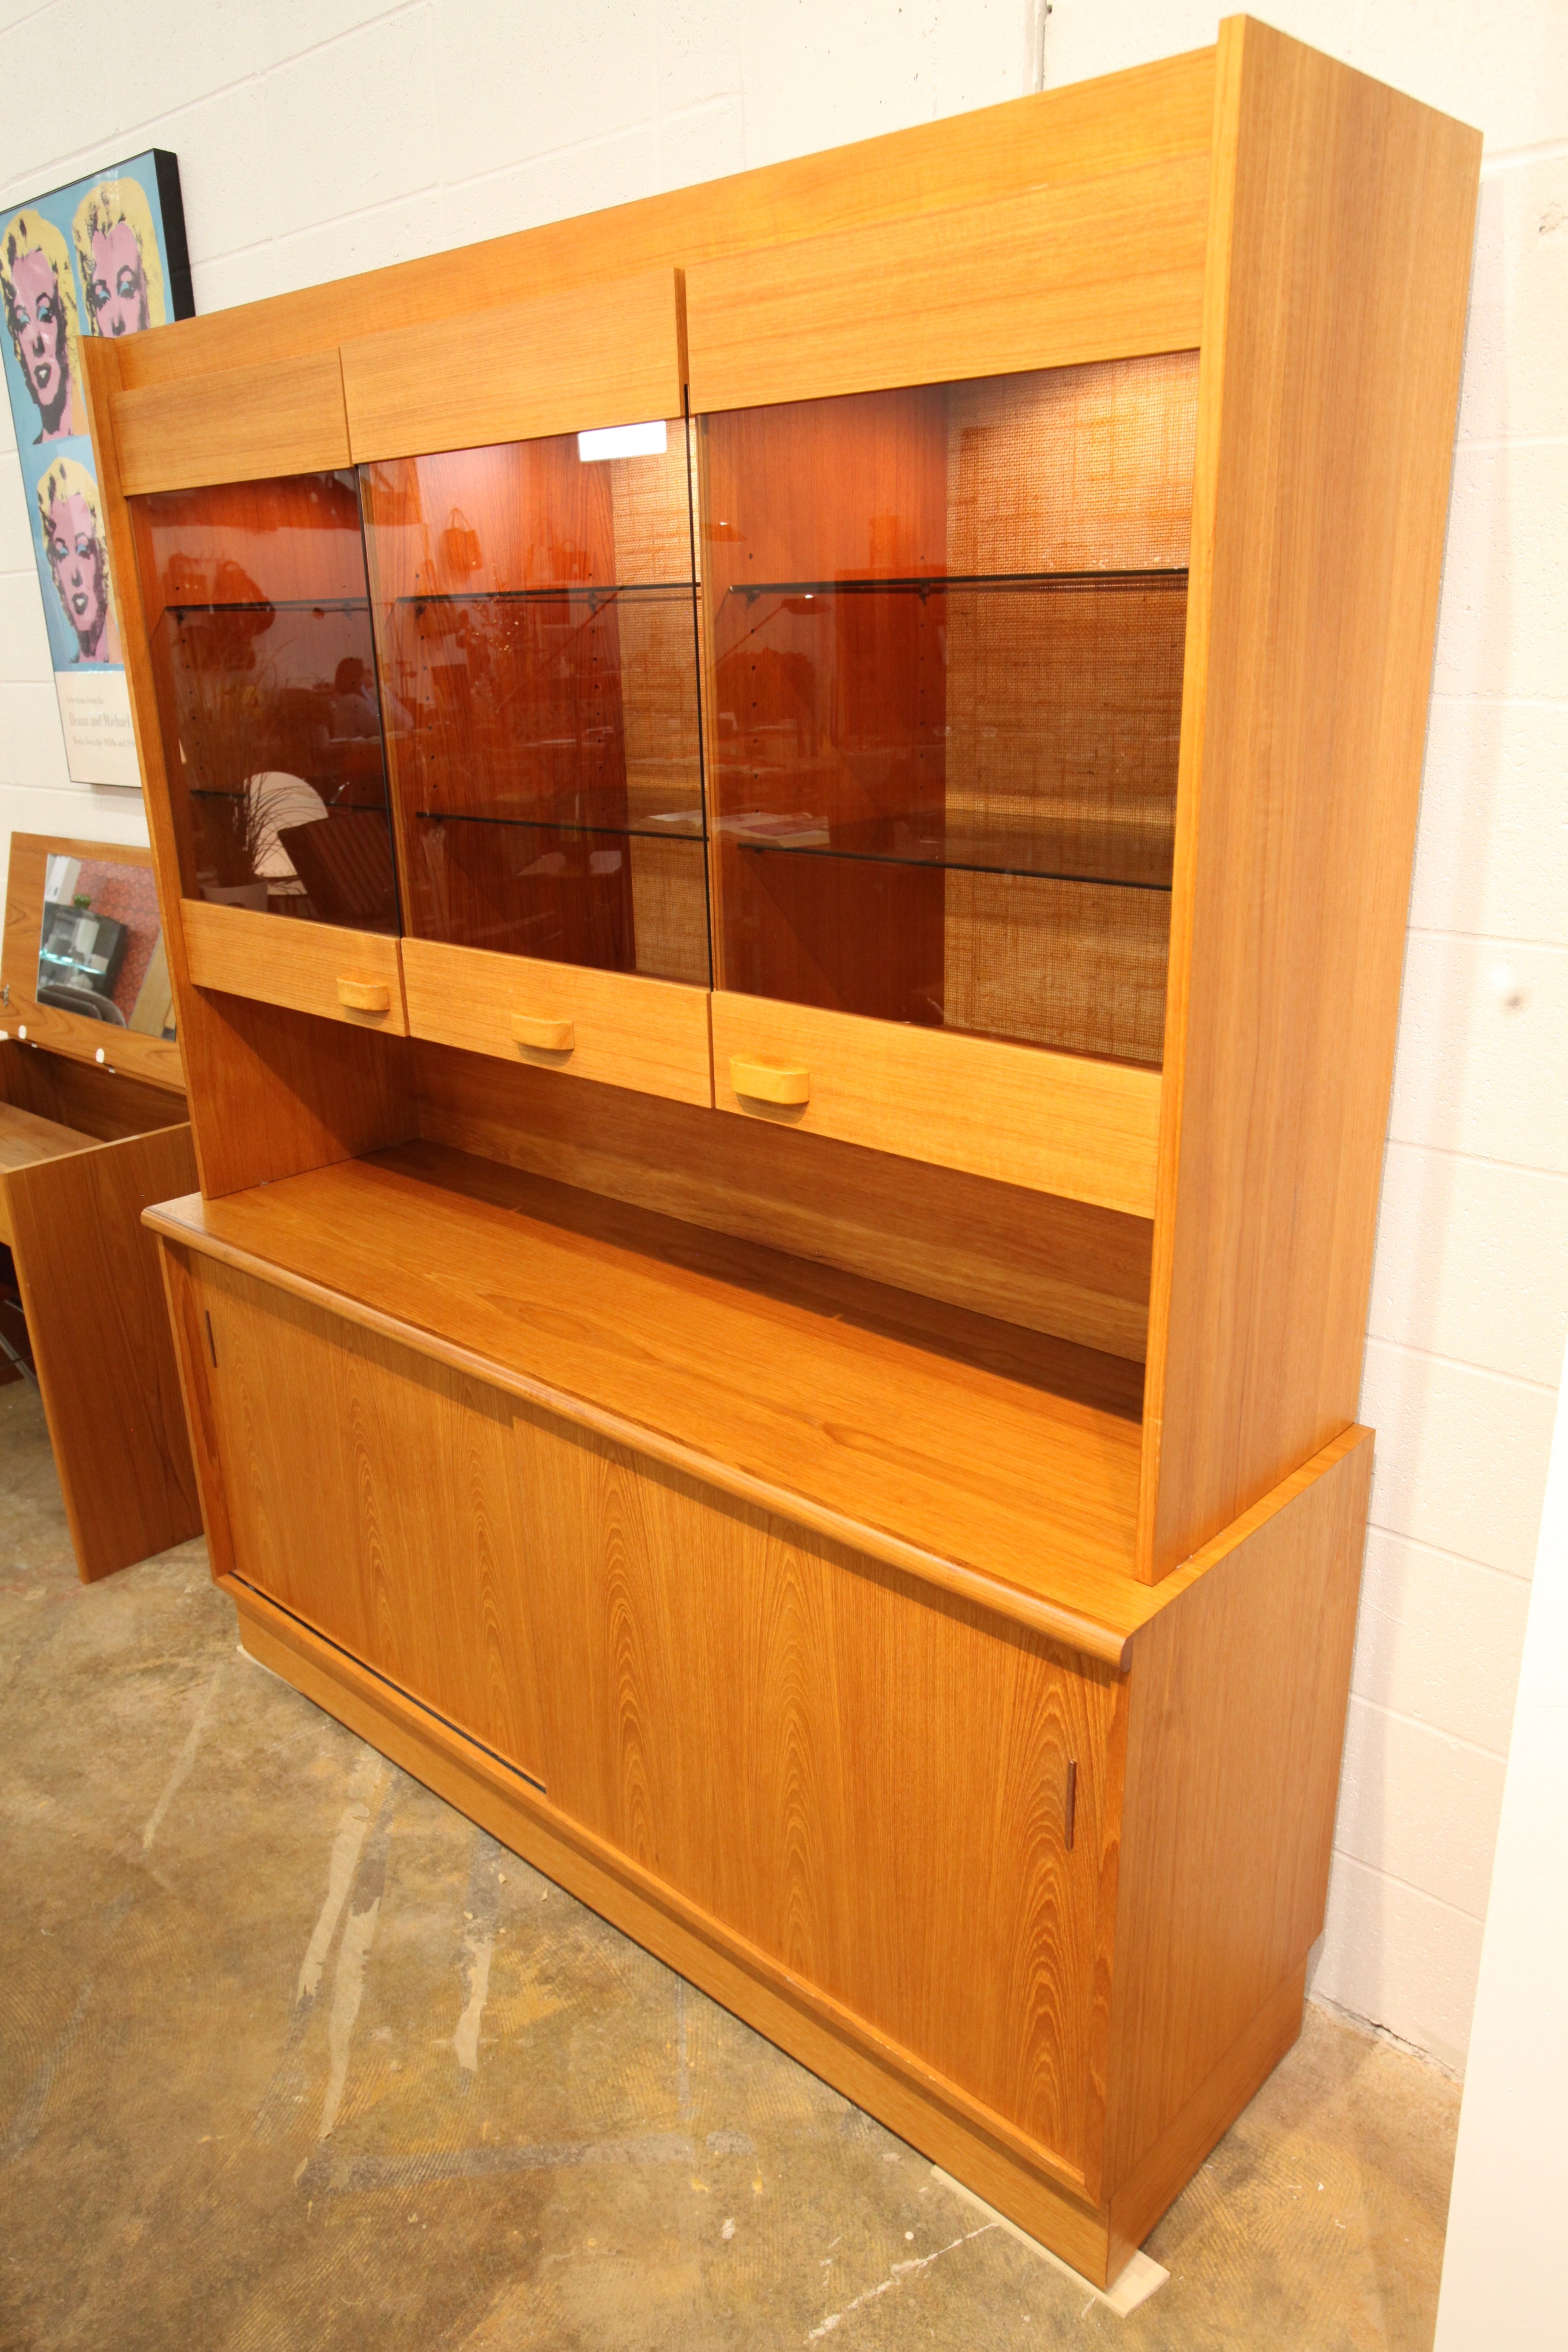 Vintage Teak Buffet and Hutch by RS Associates Montreal (61.75"W x 18.25"D x 73"H)